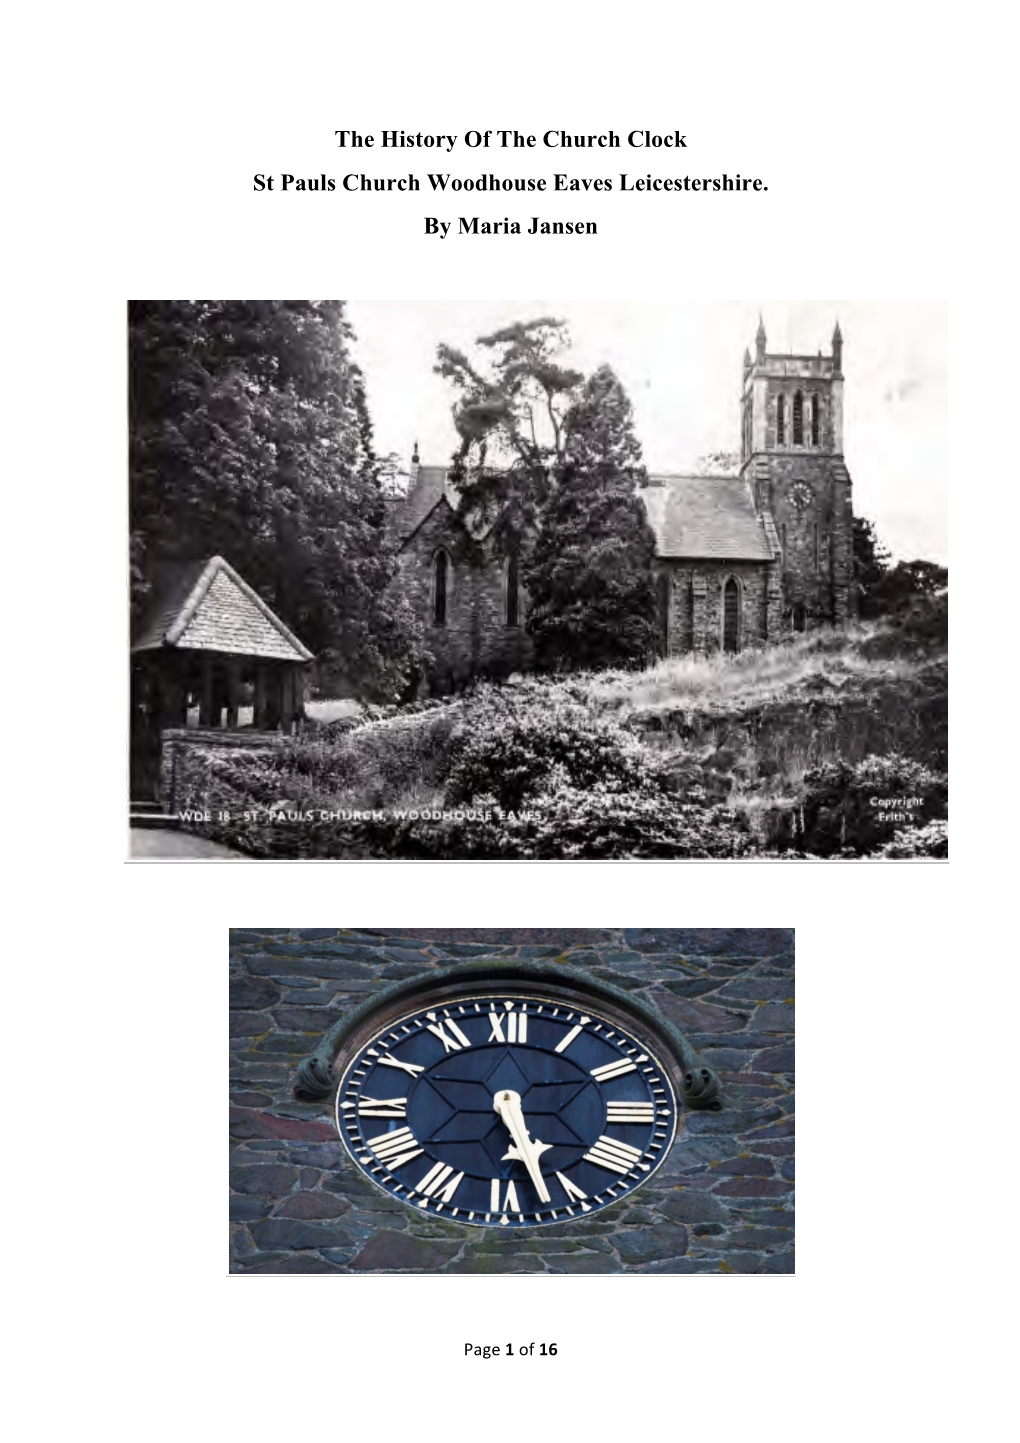 The History of the Church Clock St Pauls Church Woodhouse Eaves Leicestershire